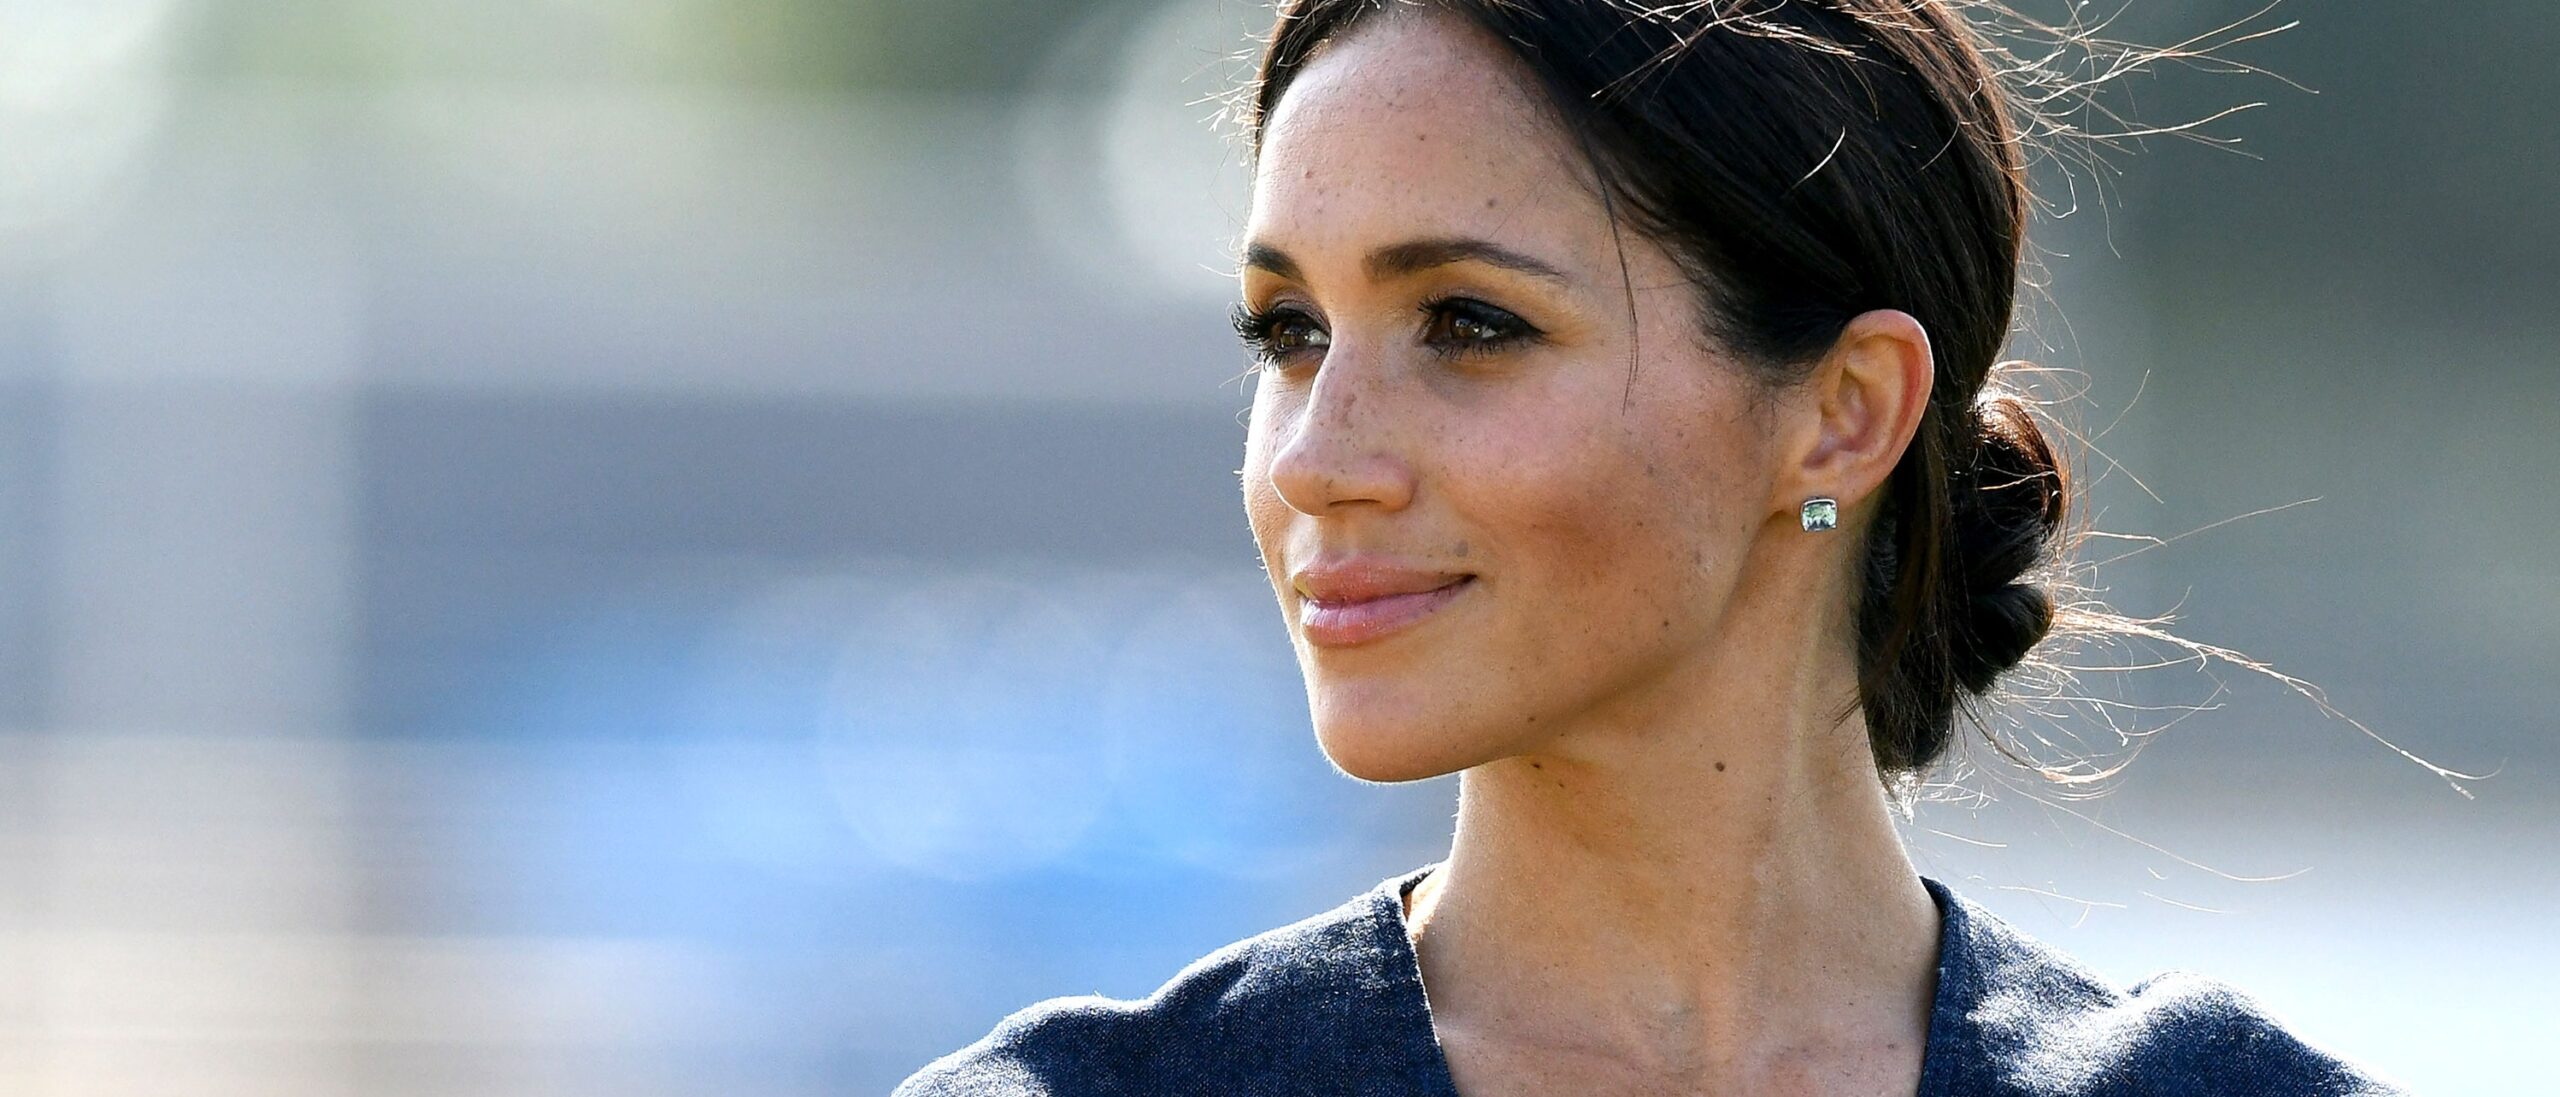 Exclusive Photos of Meghan Markle Before She Became Famous